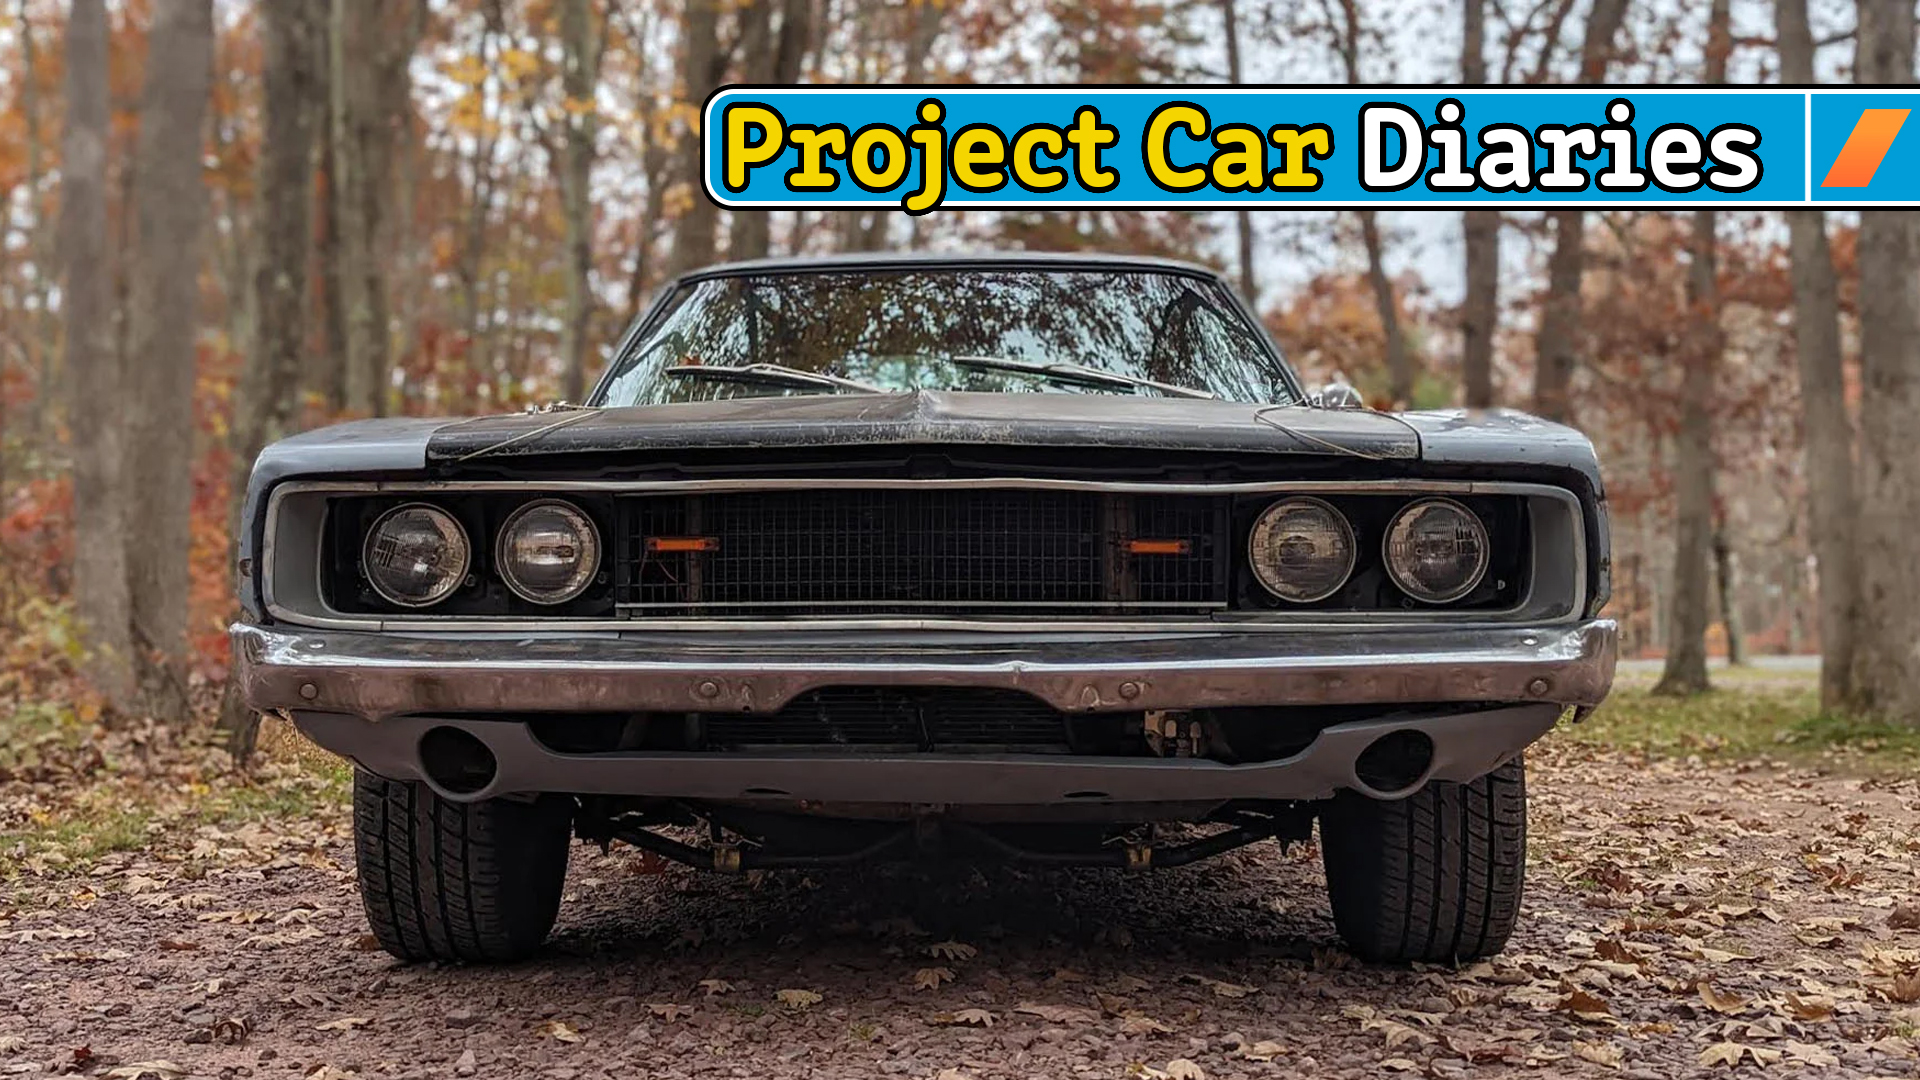 Saving My 1969 Dodge Charger's Valance With Scrap Metal | The Drive